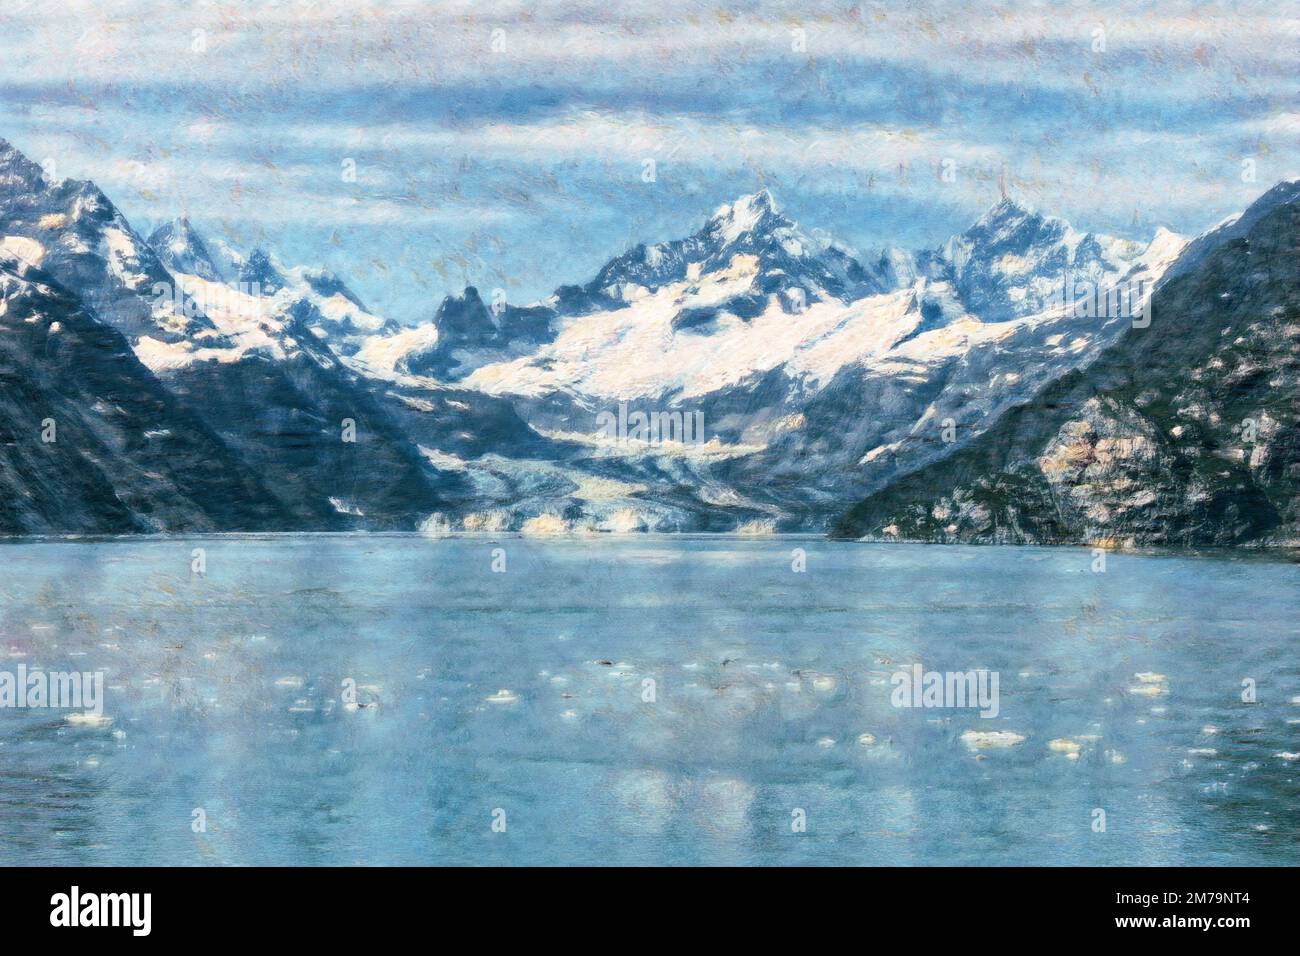 Digital painting effect on a photo of Alaskan glacier flowing into bay with floating ice and water in forefront. Stock Photo